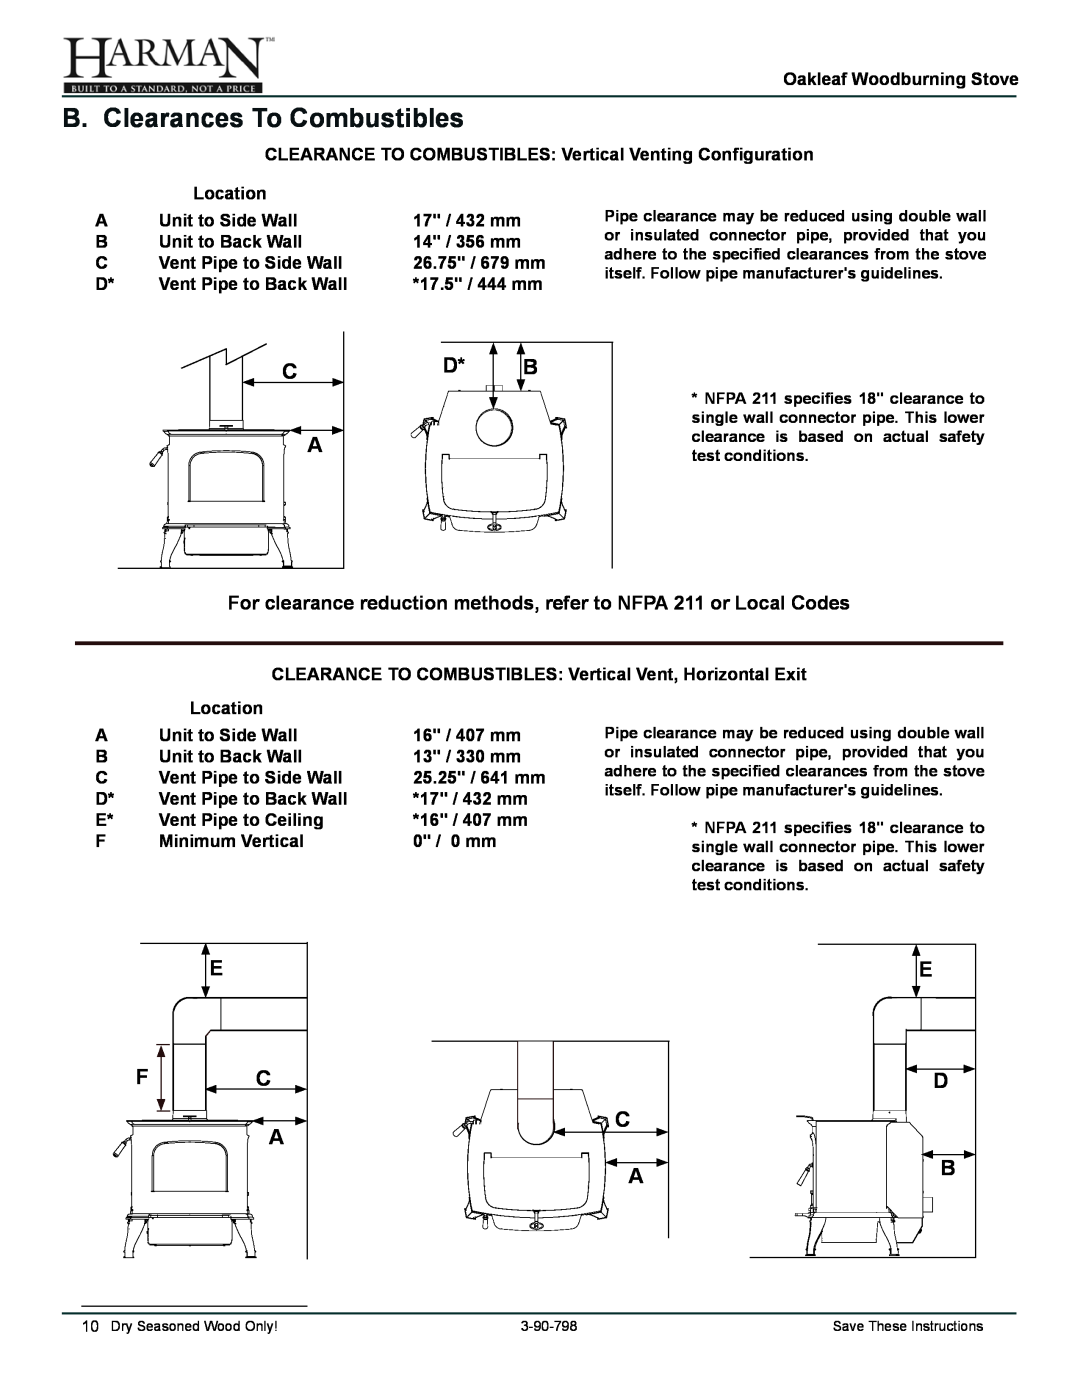 Harman Stove Company 1-90-79700 owner manual B. Clearances To Combustibles 